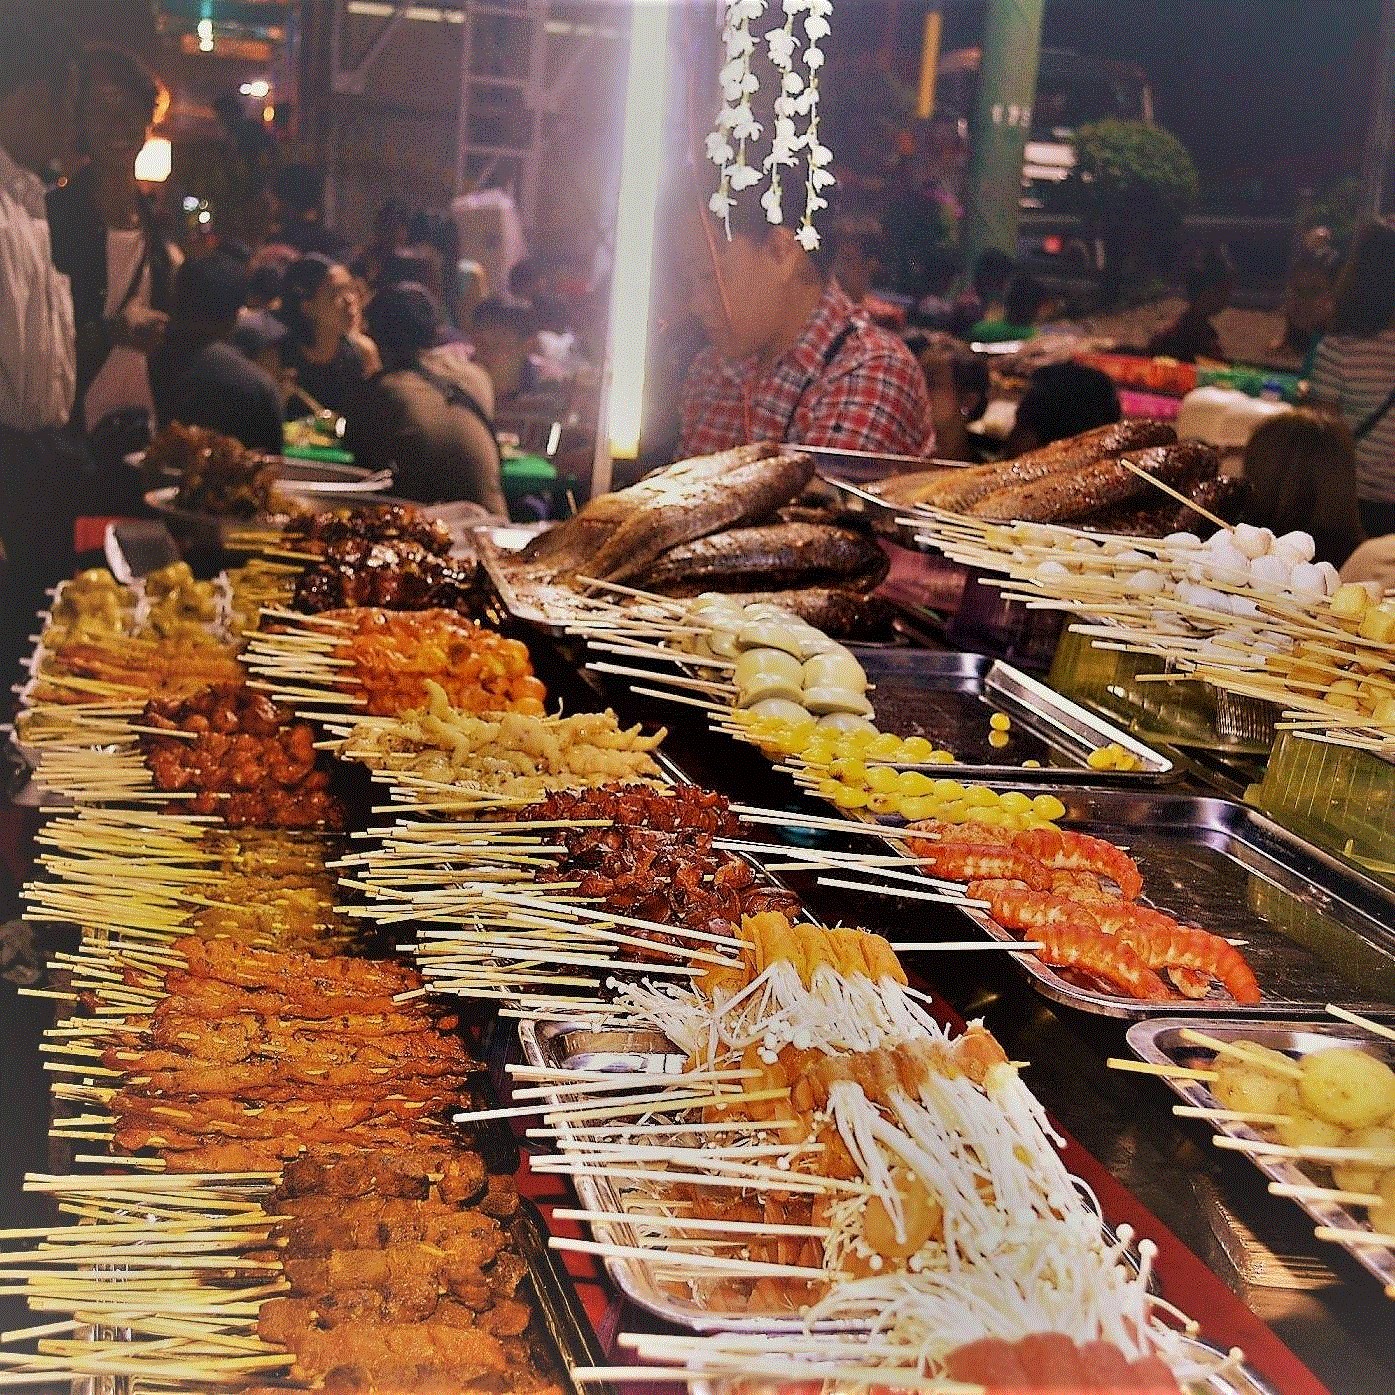 Yangon evening street food tour: Barbecue at 19th Street